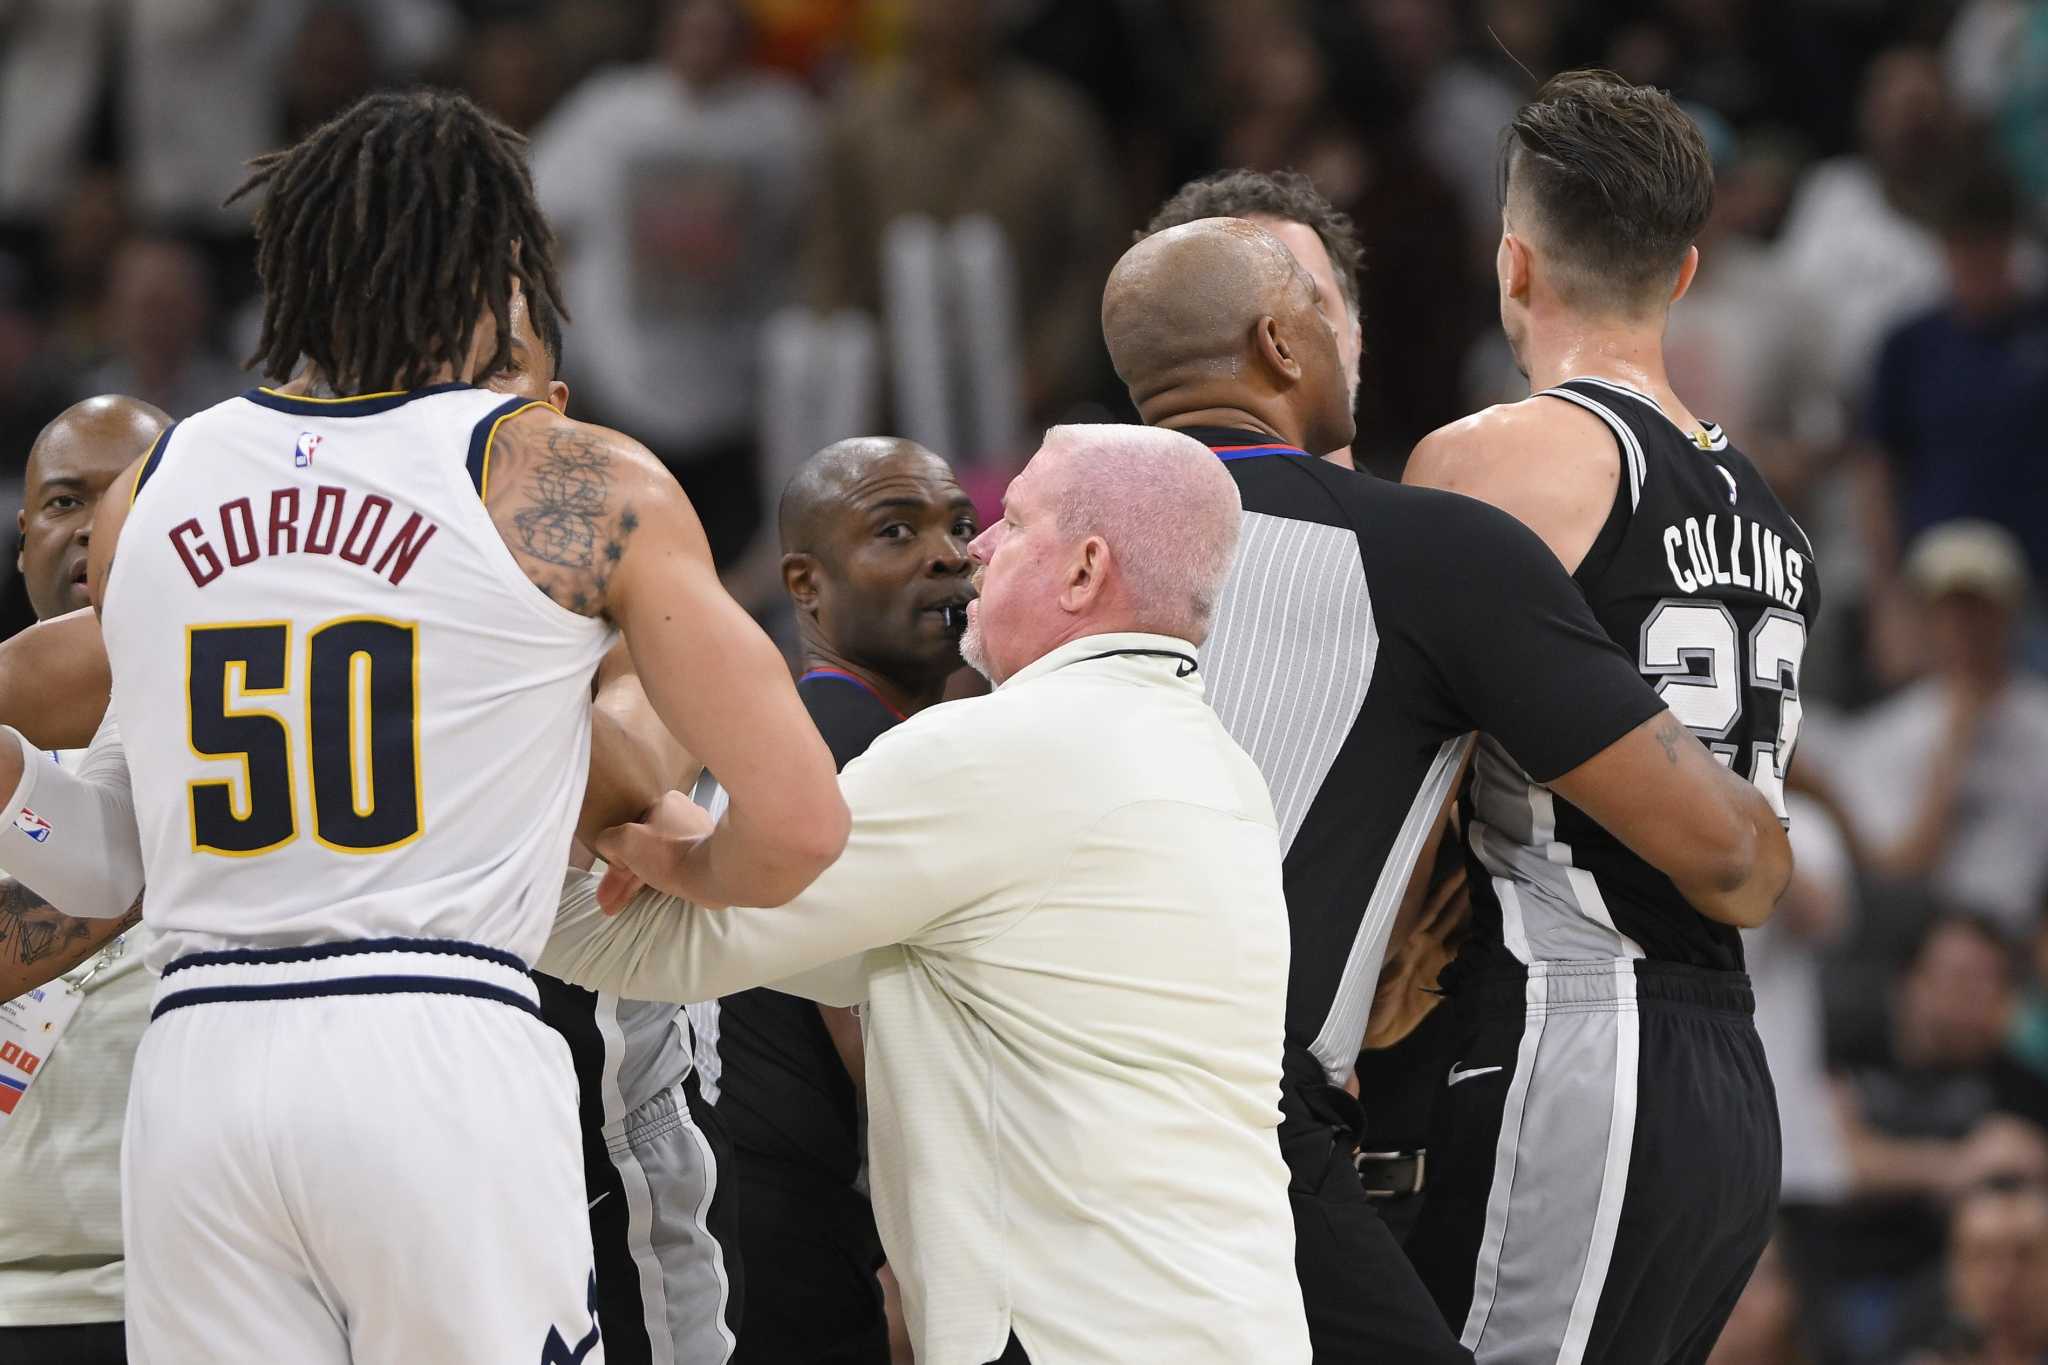 Michael Porter Jr grabs Zach Collins by neck during altercation